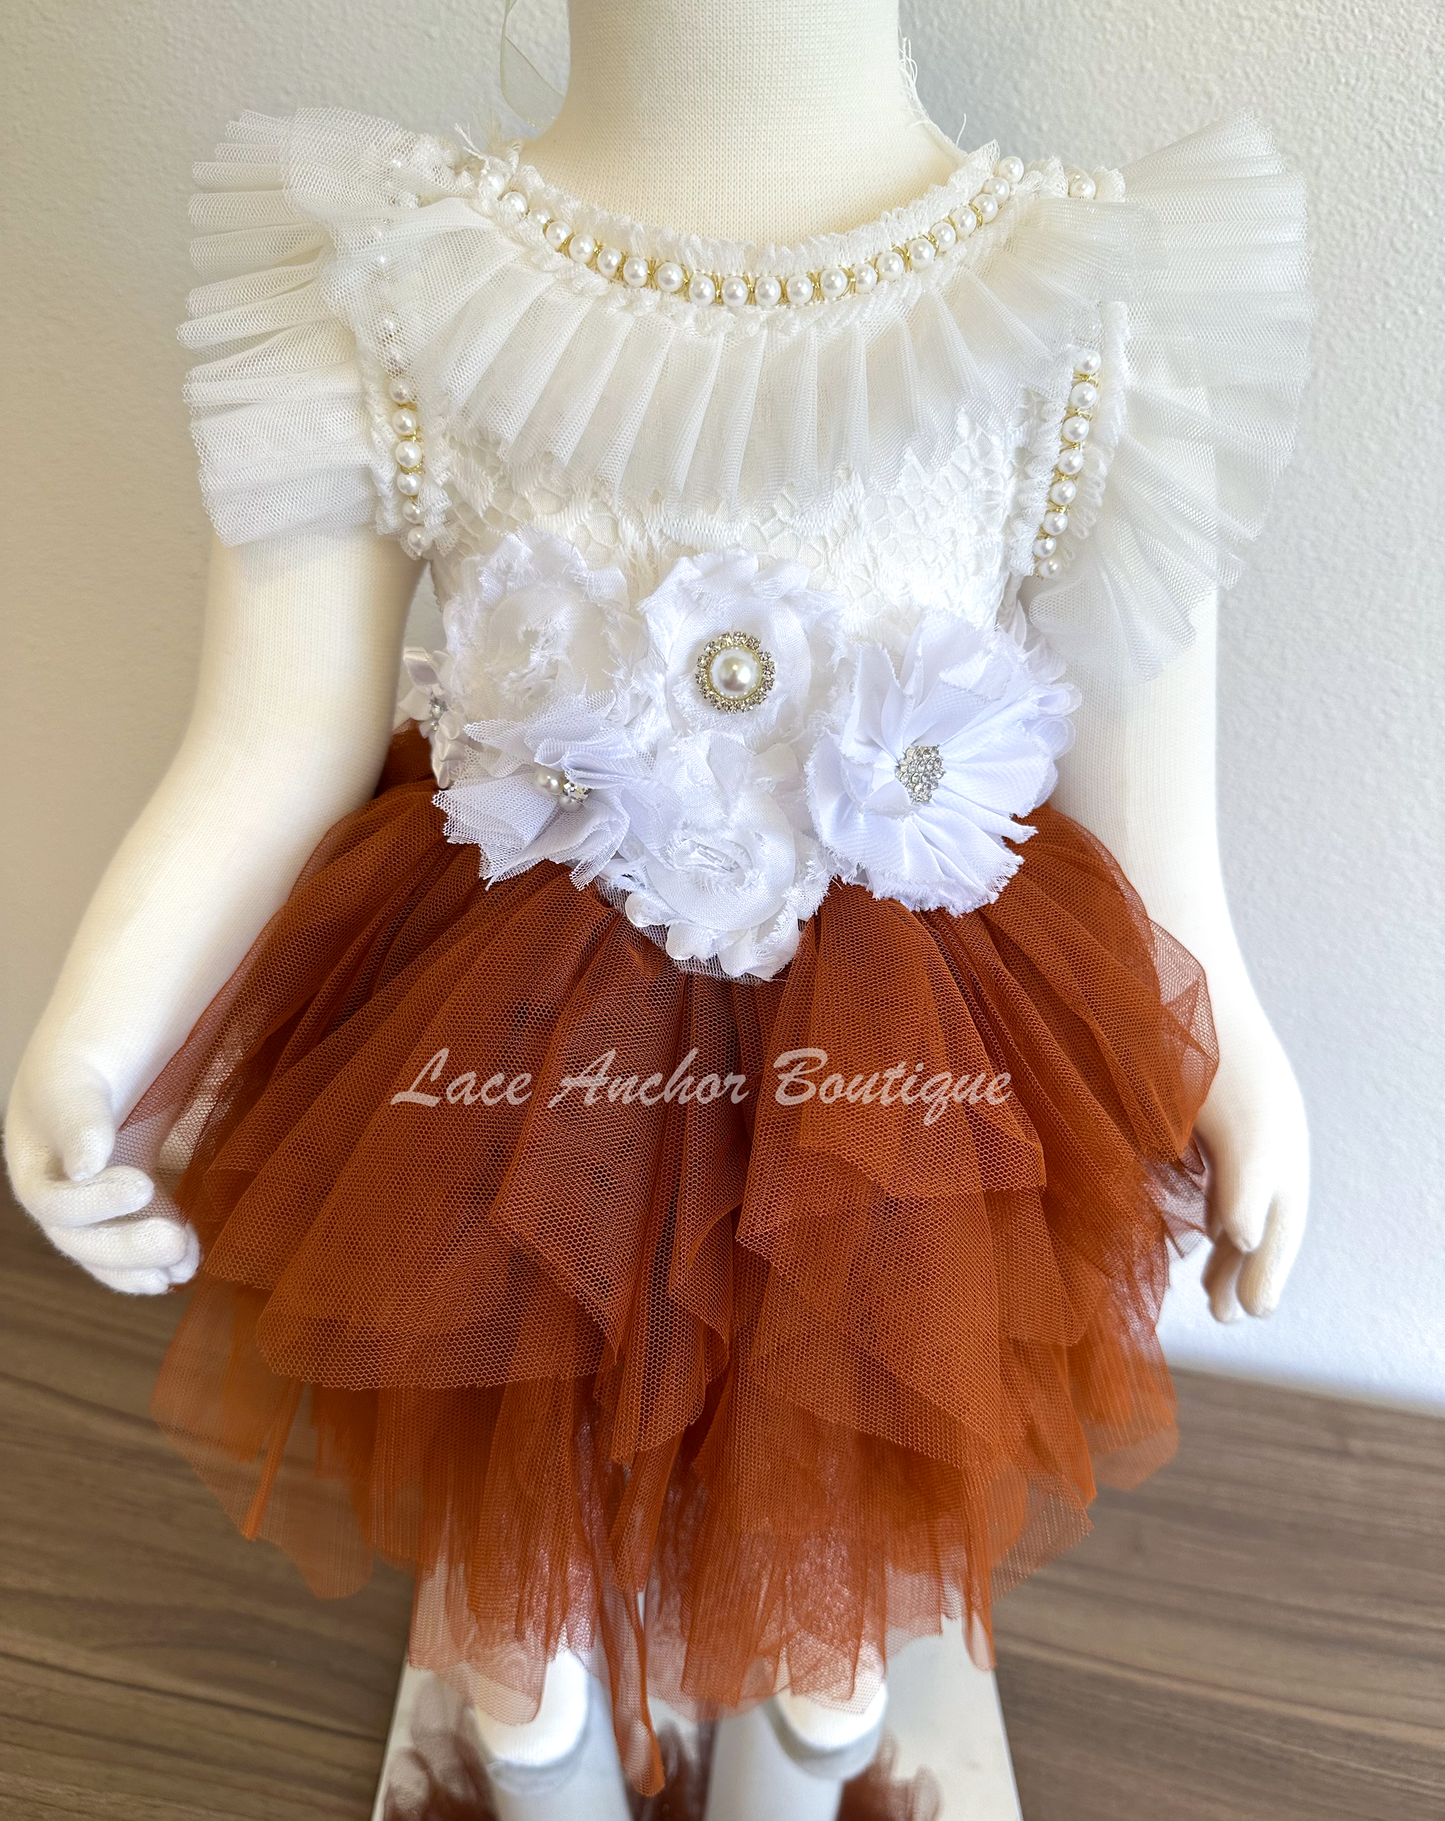 flower girls short dress with rust copper tulle skirt, white lace top with flutter sleeves, pearl beading, and white floral tied sash